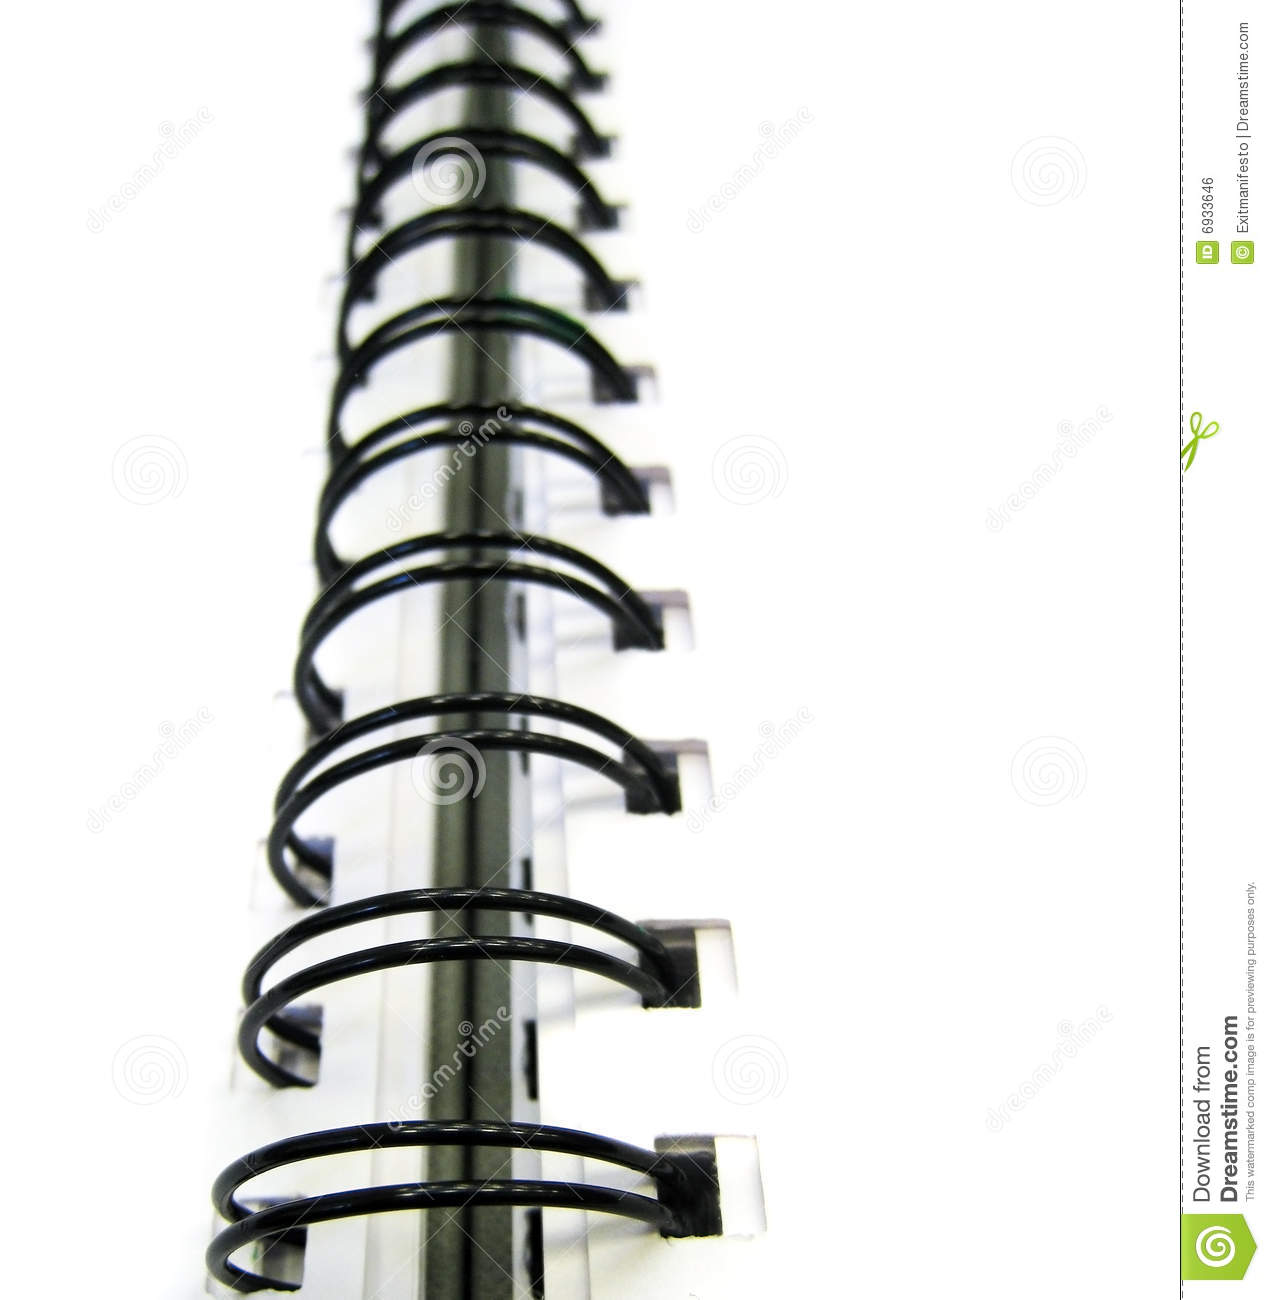 Coil Binding Close Up Royalty Free Stock Image   Image  6933646